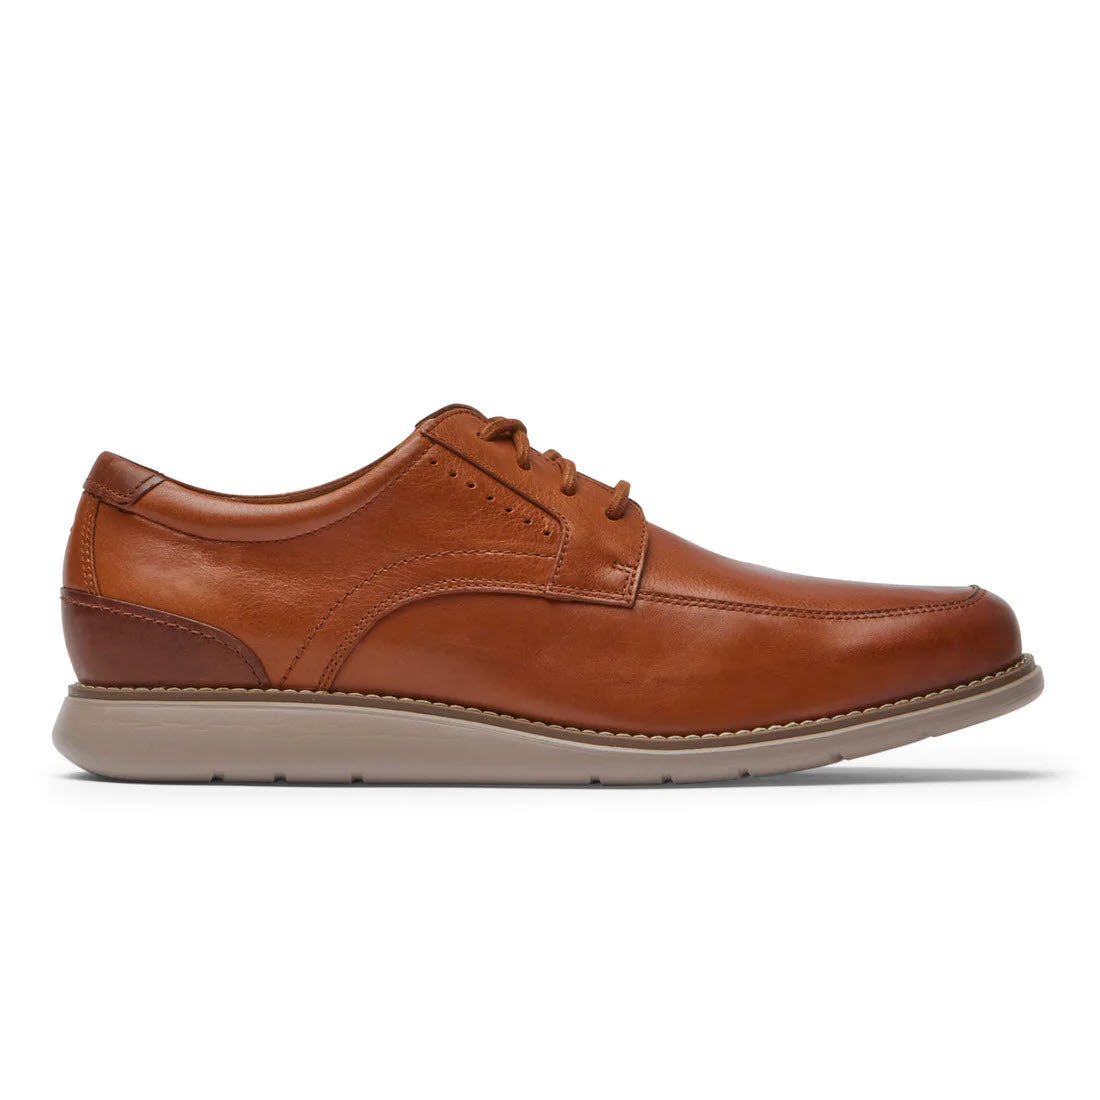 A single brown leather Rockport Total Motion Craft men's dress shoe with laces on a white background.